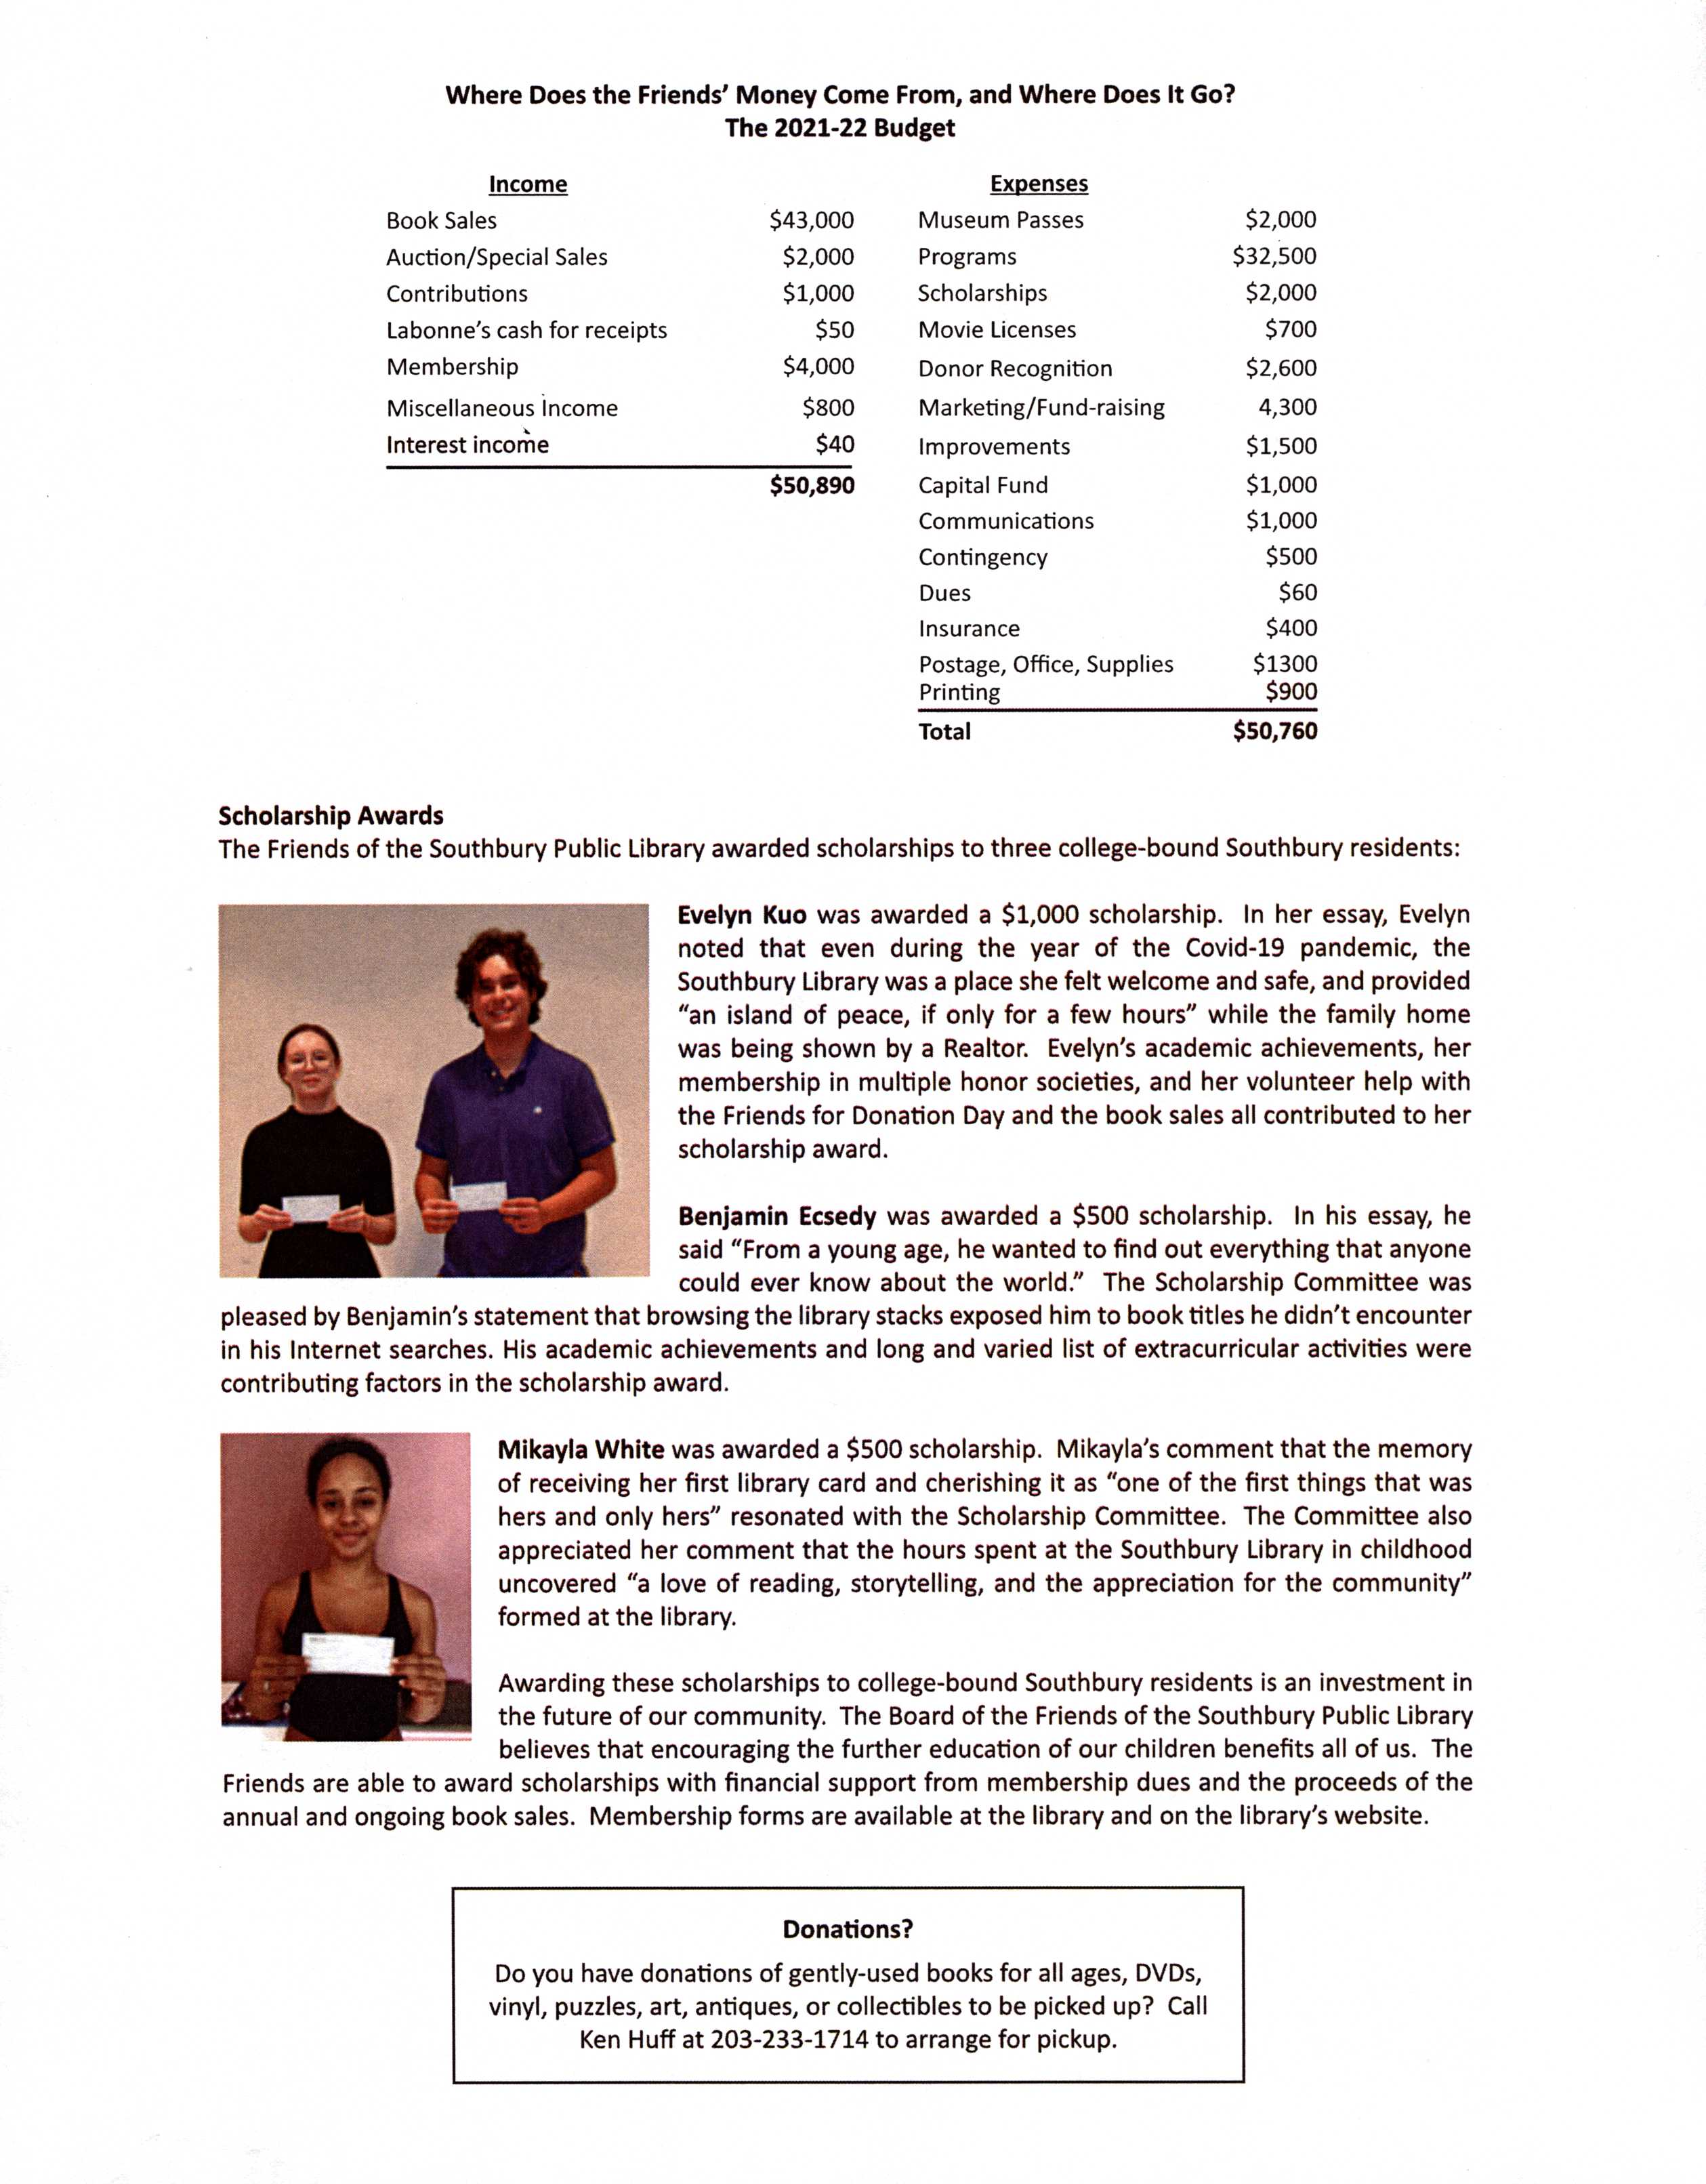 The second page of the Friends Newsletter for Summer/Fall 2021